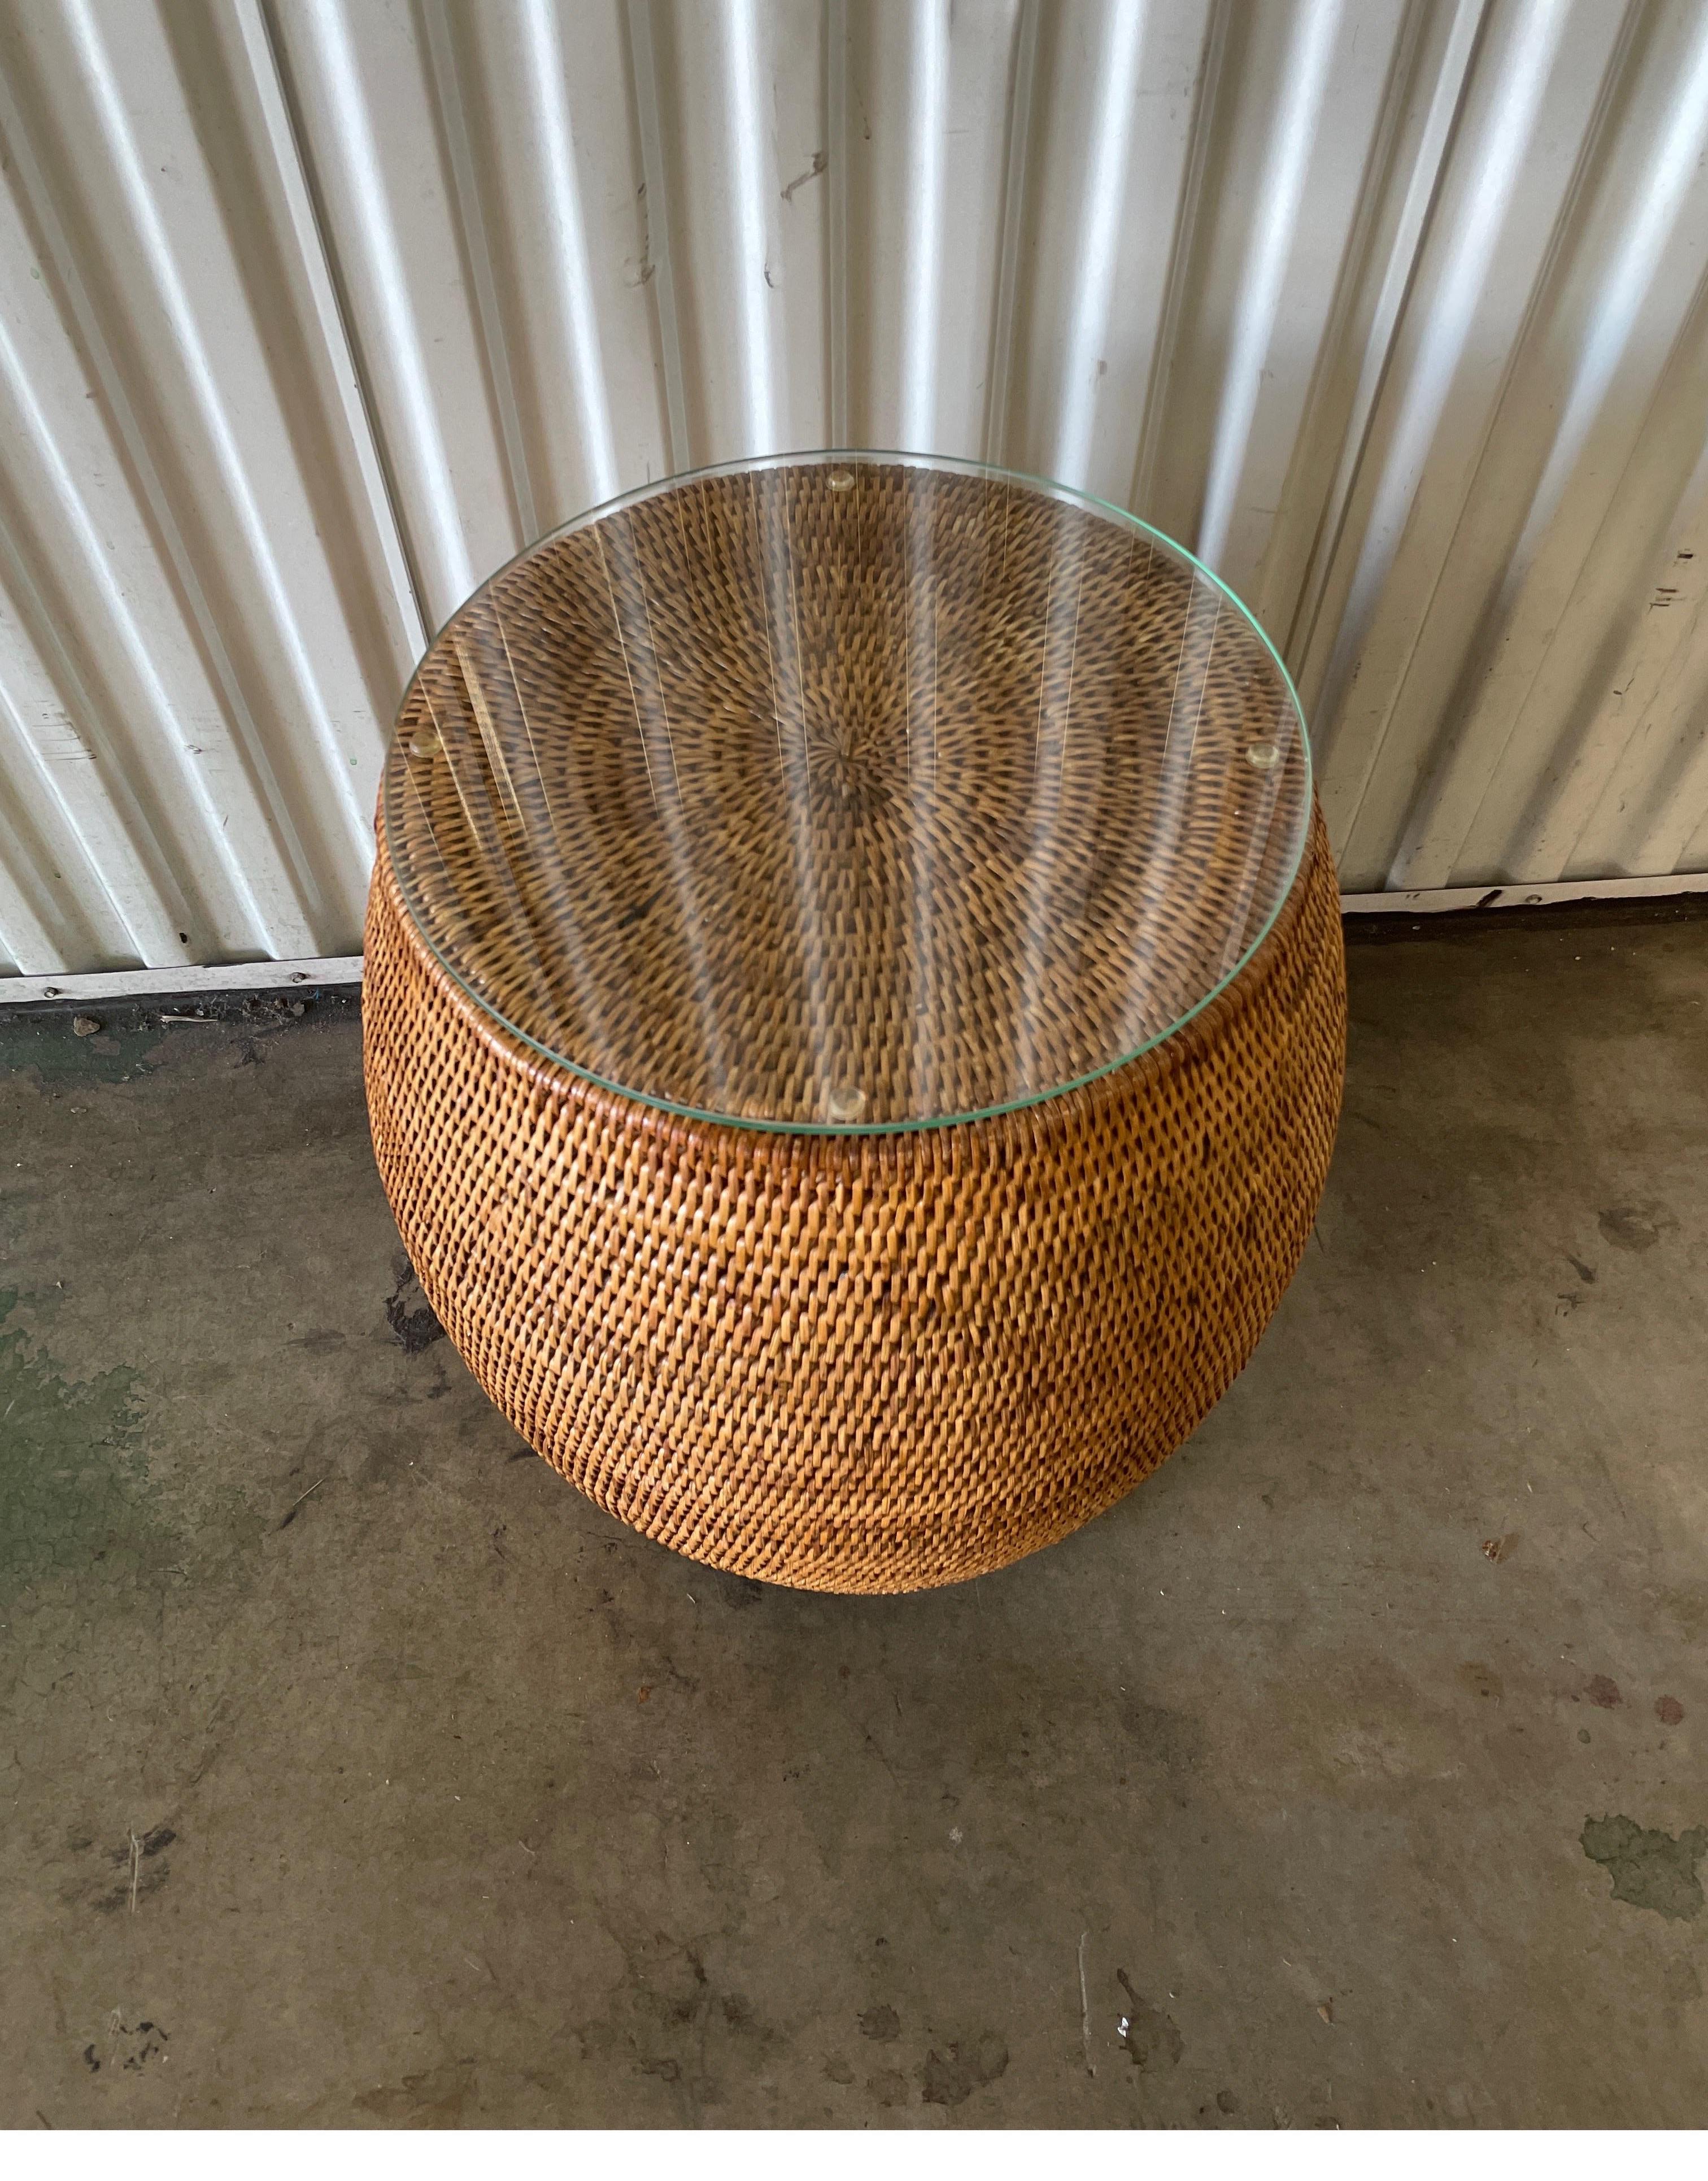 Natural woven bamboo garden stool side table with glass top. This lovely piece has a variety of uses. Makes a great drinks table.